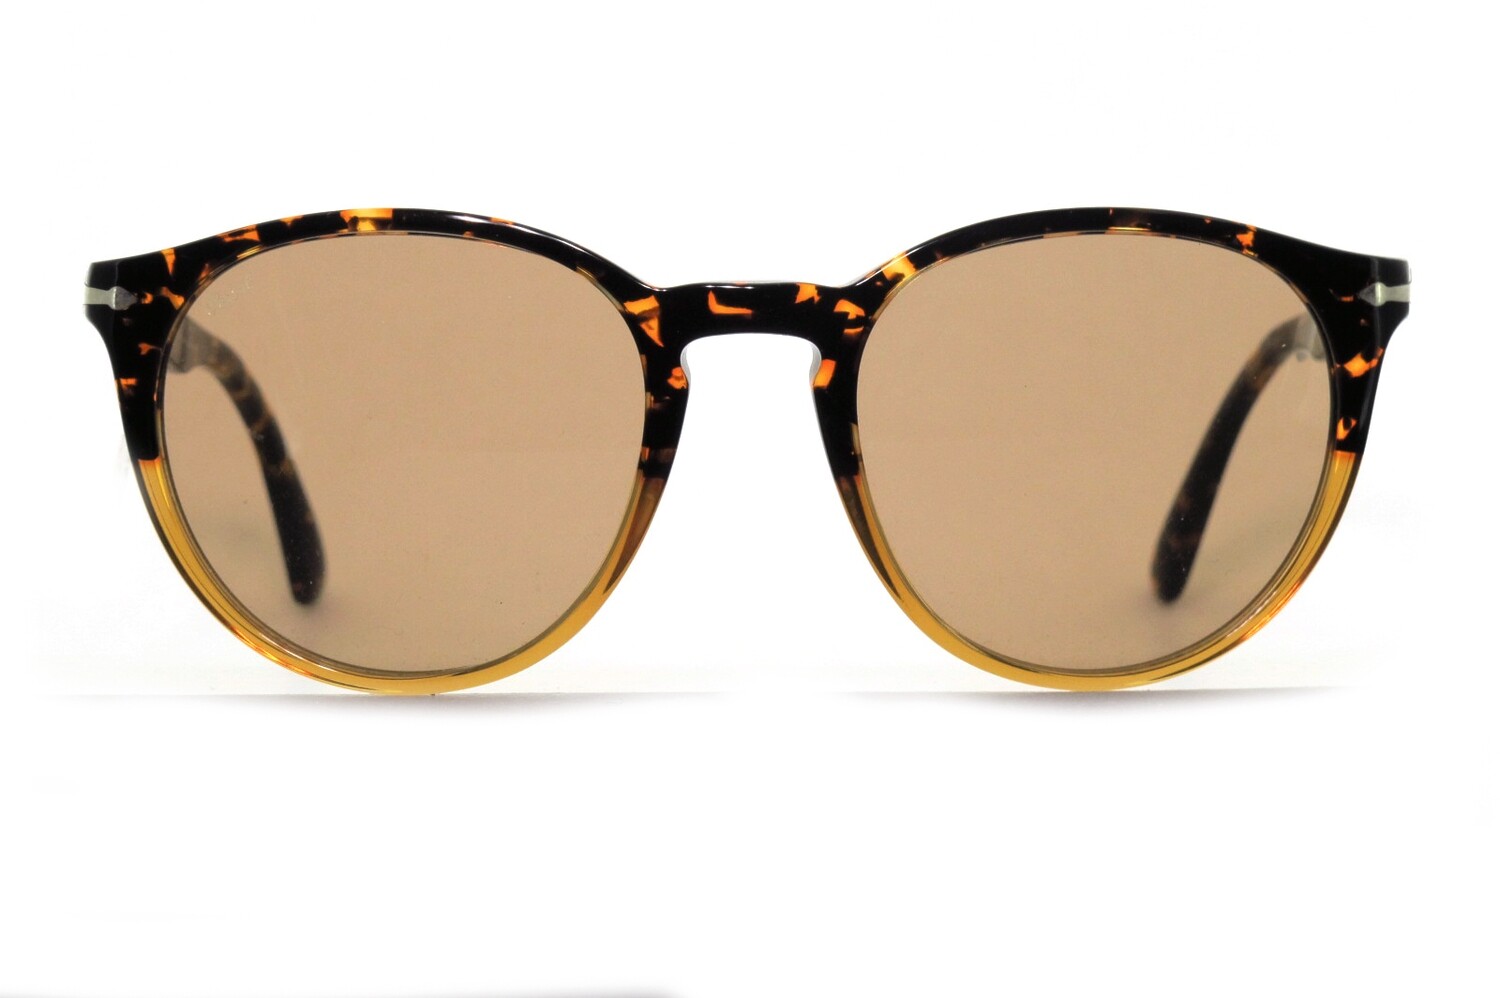 3152 by Persol